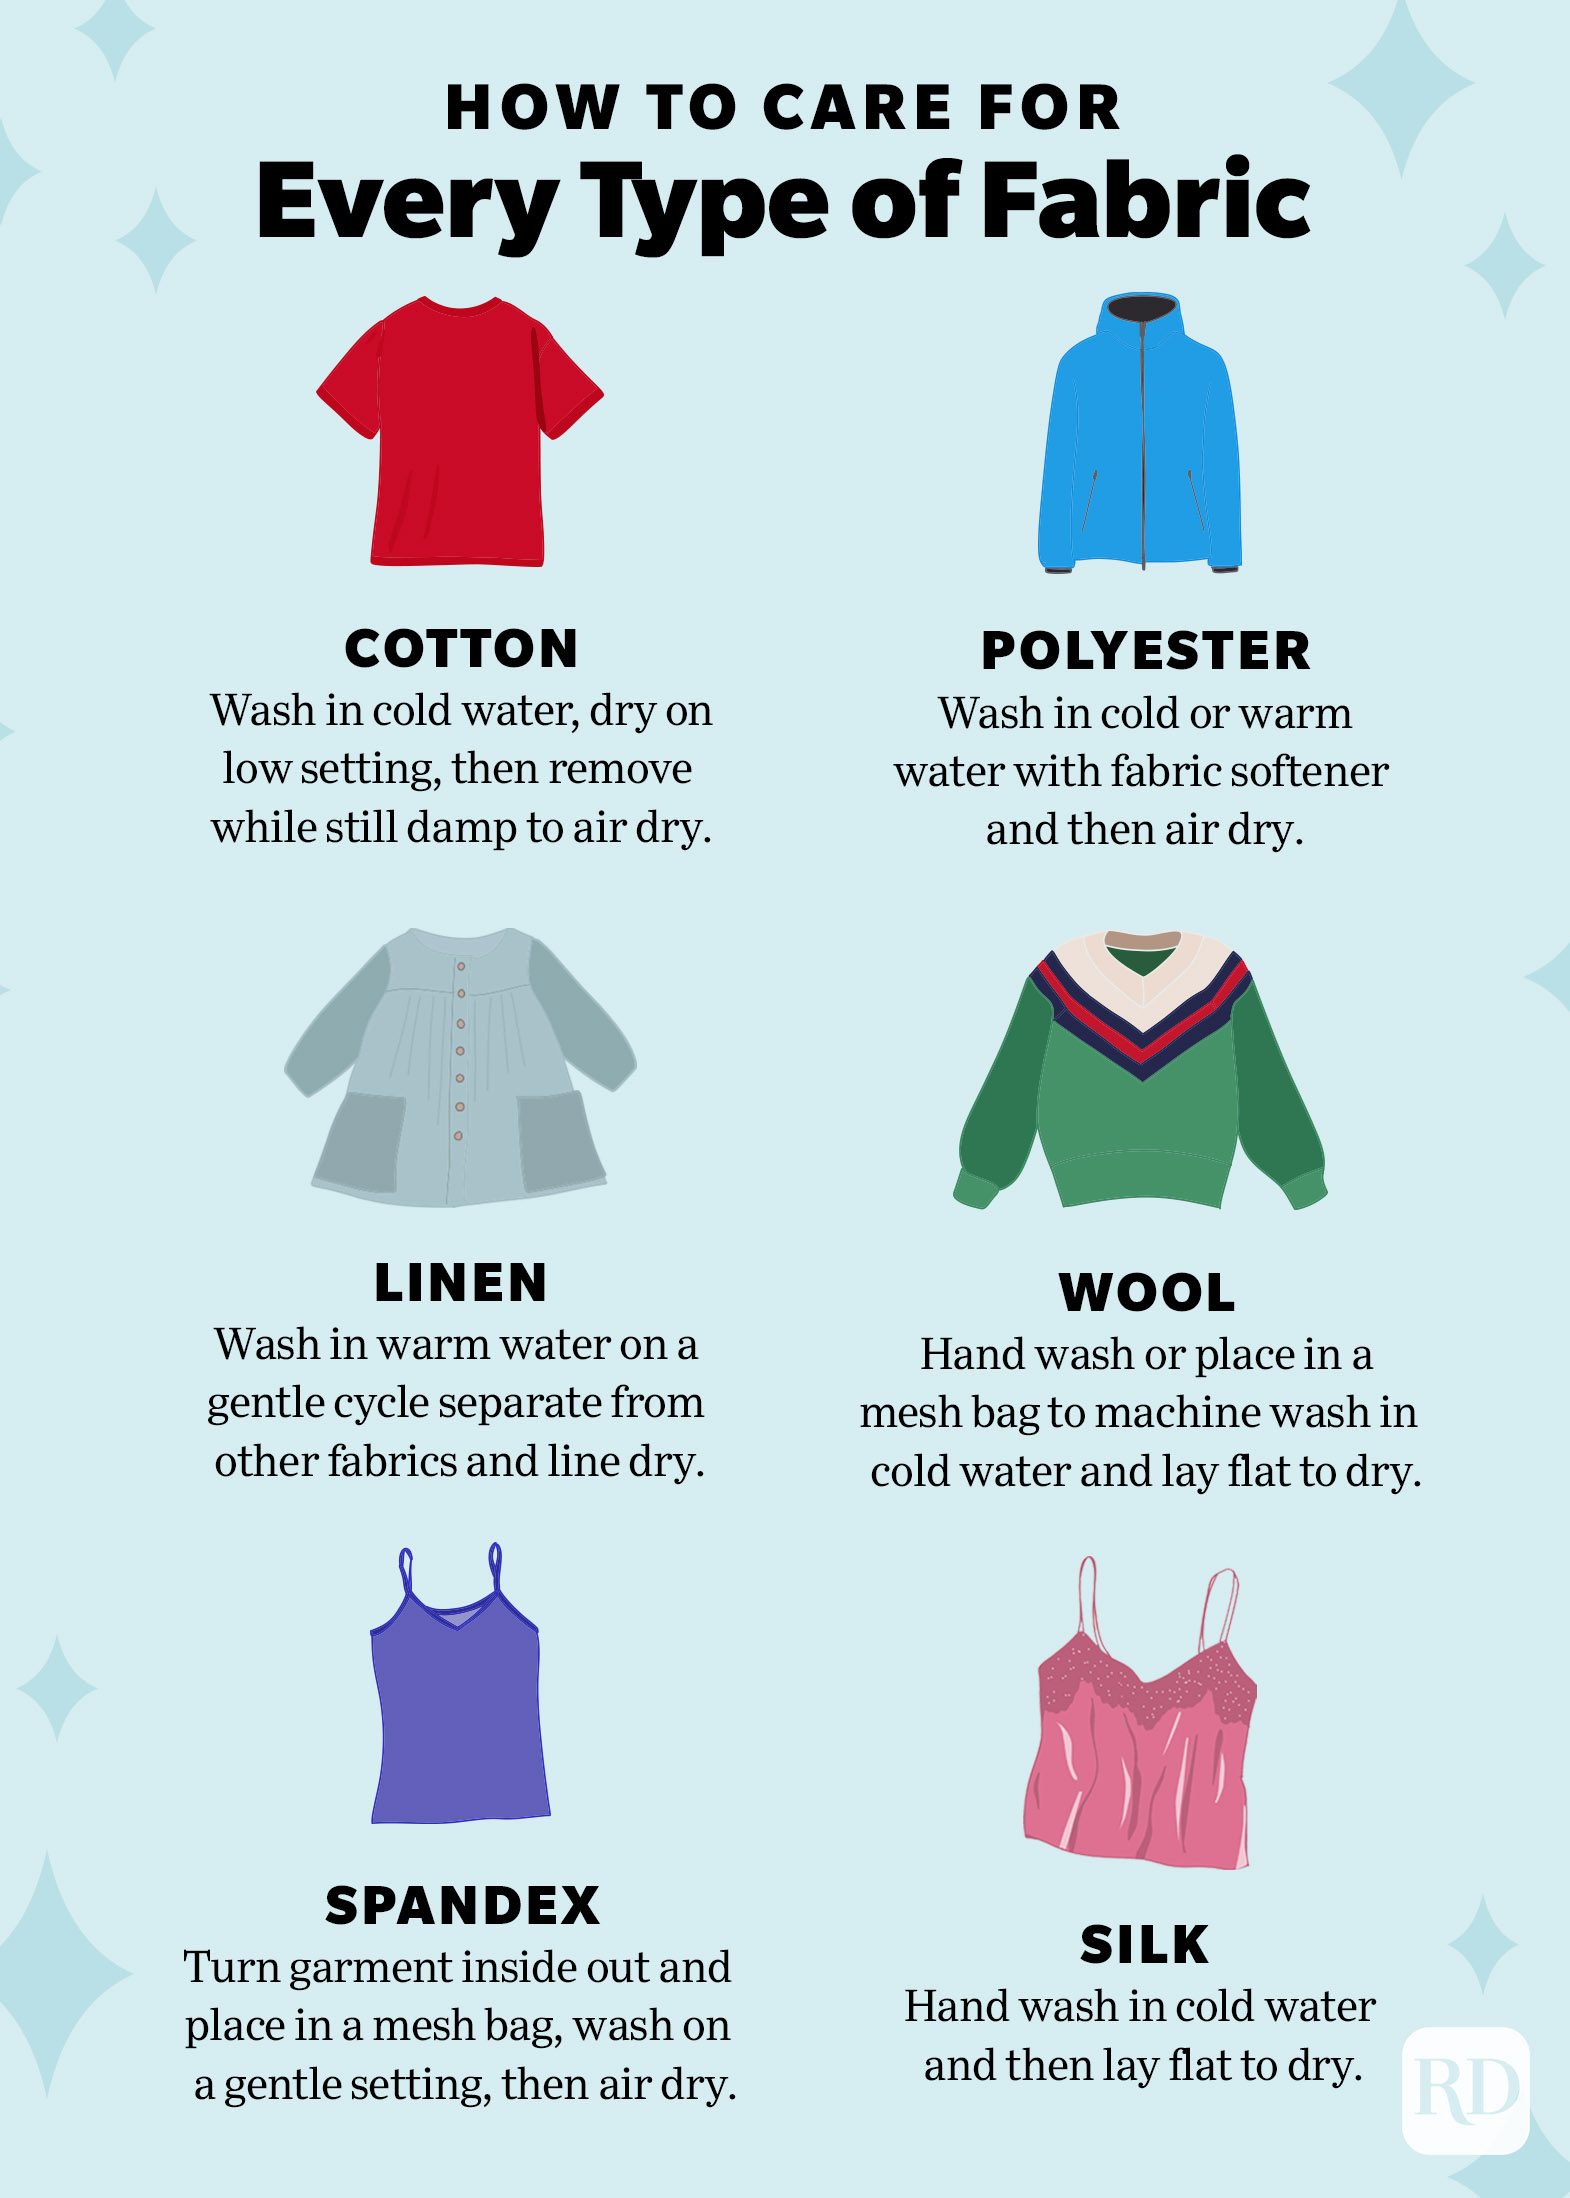 Is It Best to Wash Clothes on Cold? Here's What Experts Say